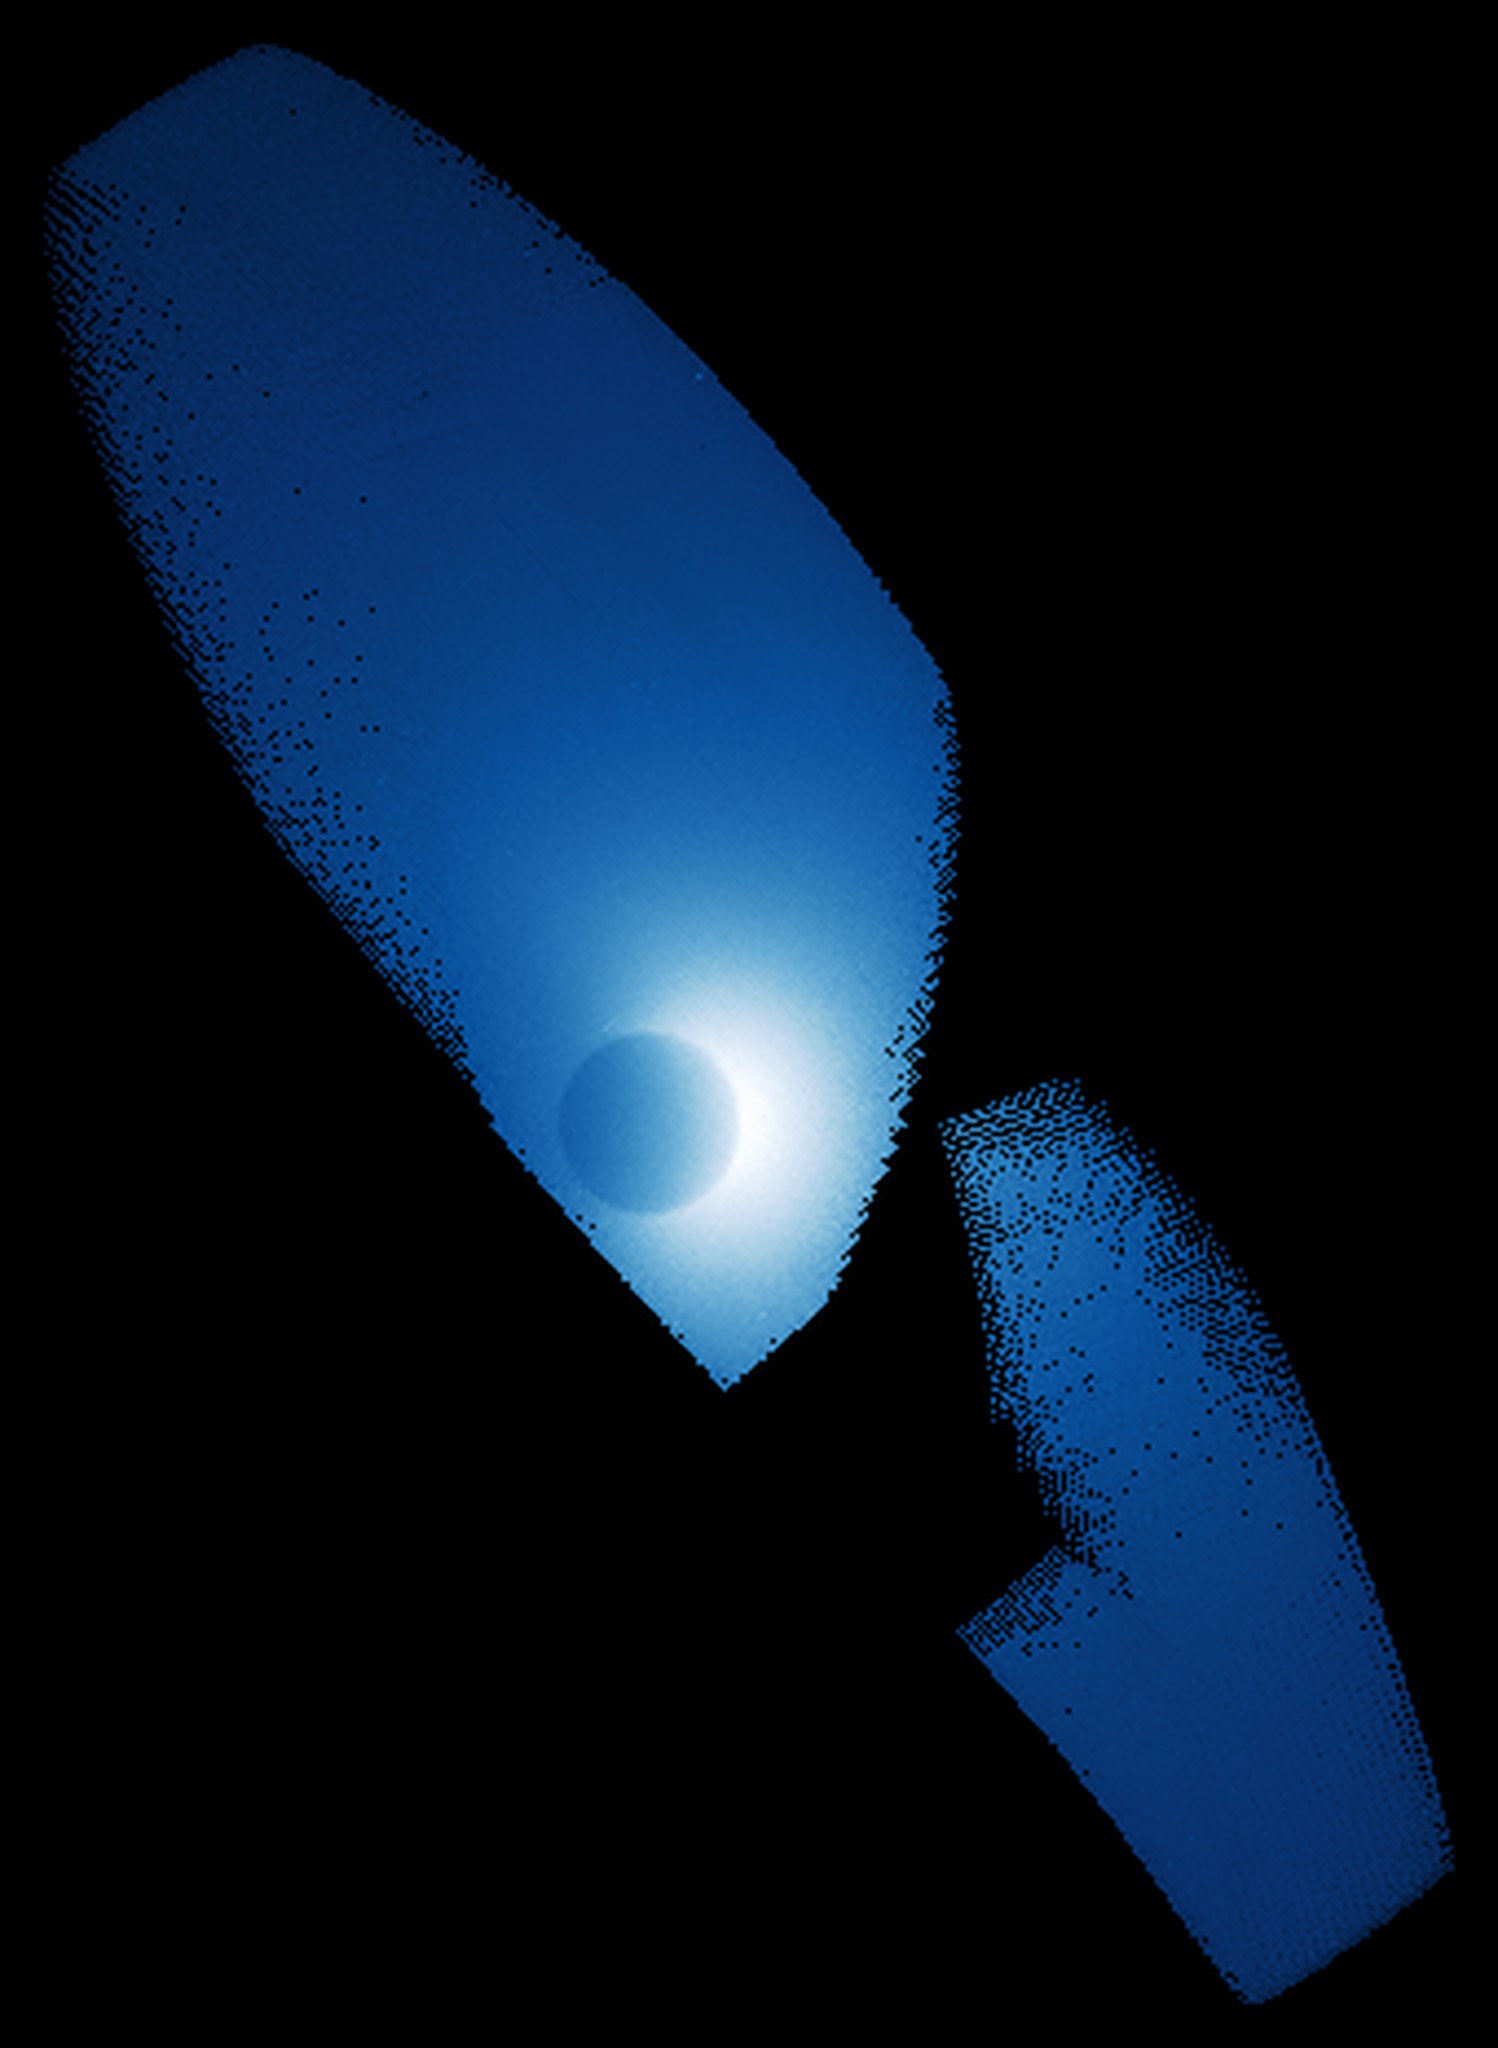 A crescent planet seen in one of two swatches of blue 